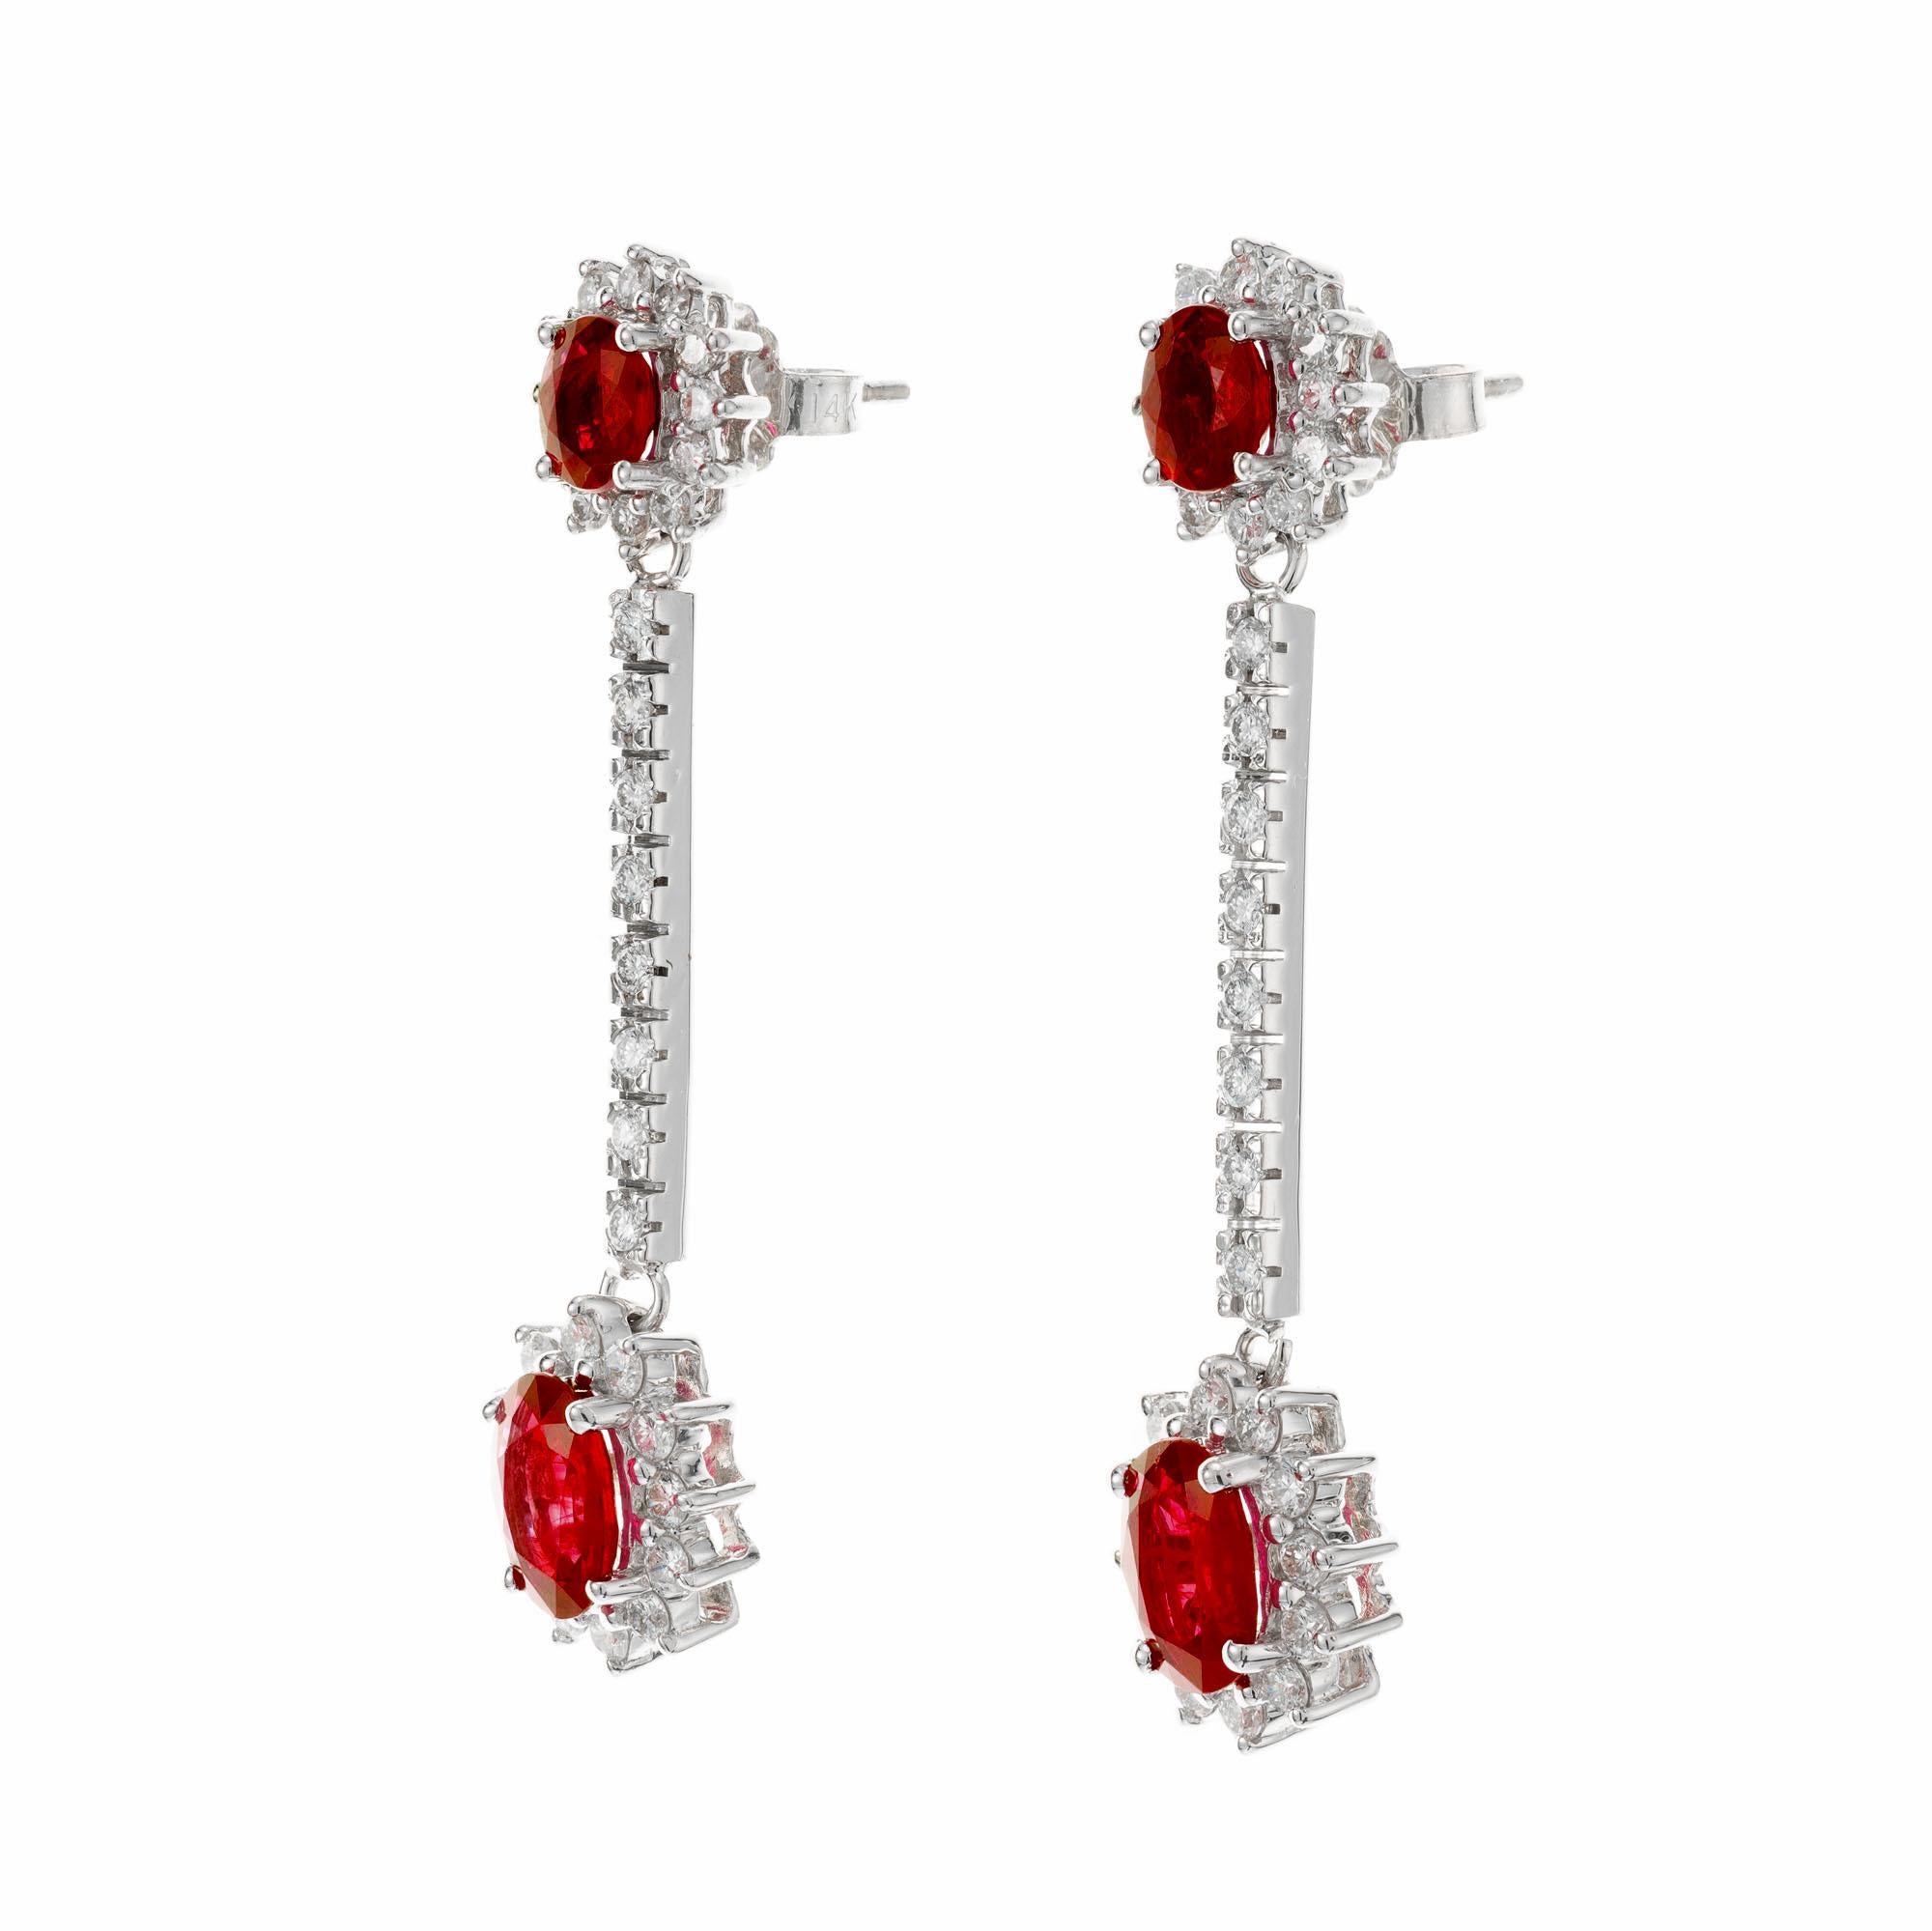 Ruby and white diamond dangle drop earrings. Set in 14k white gold with 4 oval rubies and round full cut accent diamonds. 

4 oval rubies 3.20cts
66 round diamonds approx. total weight .66cts
14k White Gold
Stamped 585 14k
6.0 grams
1 5/8 x 3/8 inch